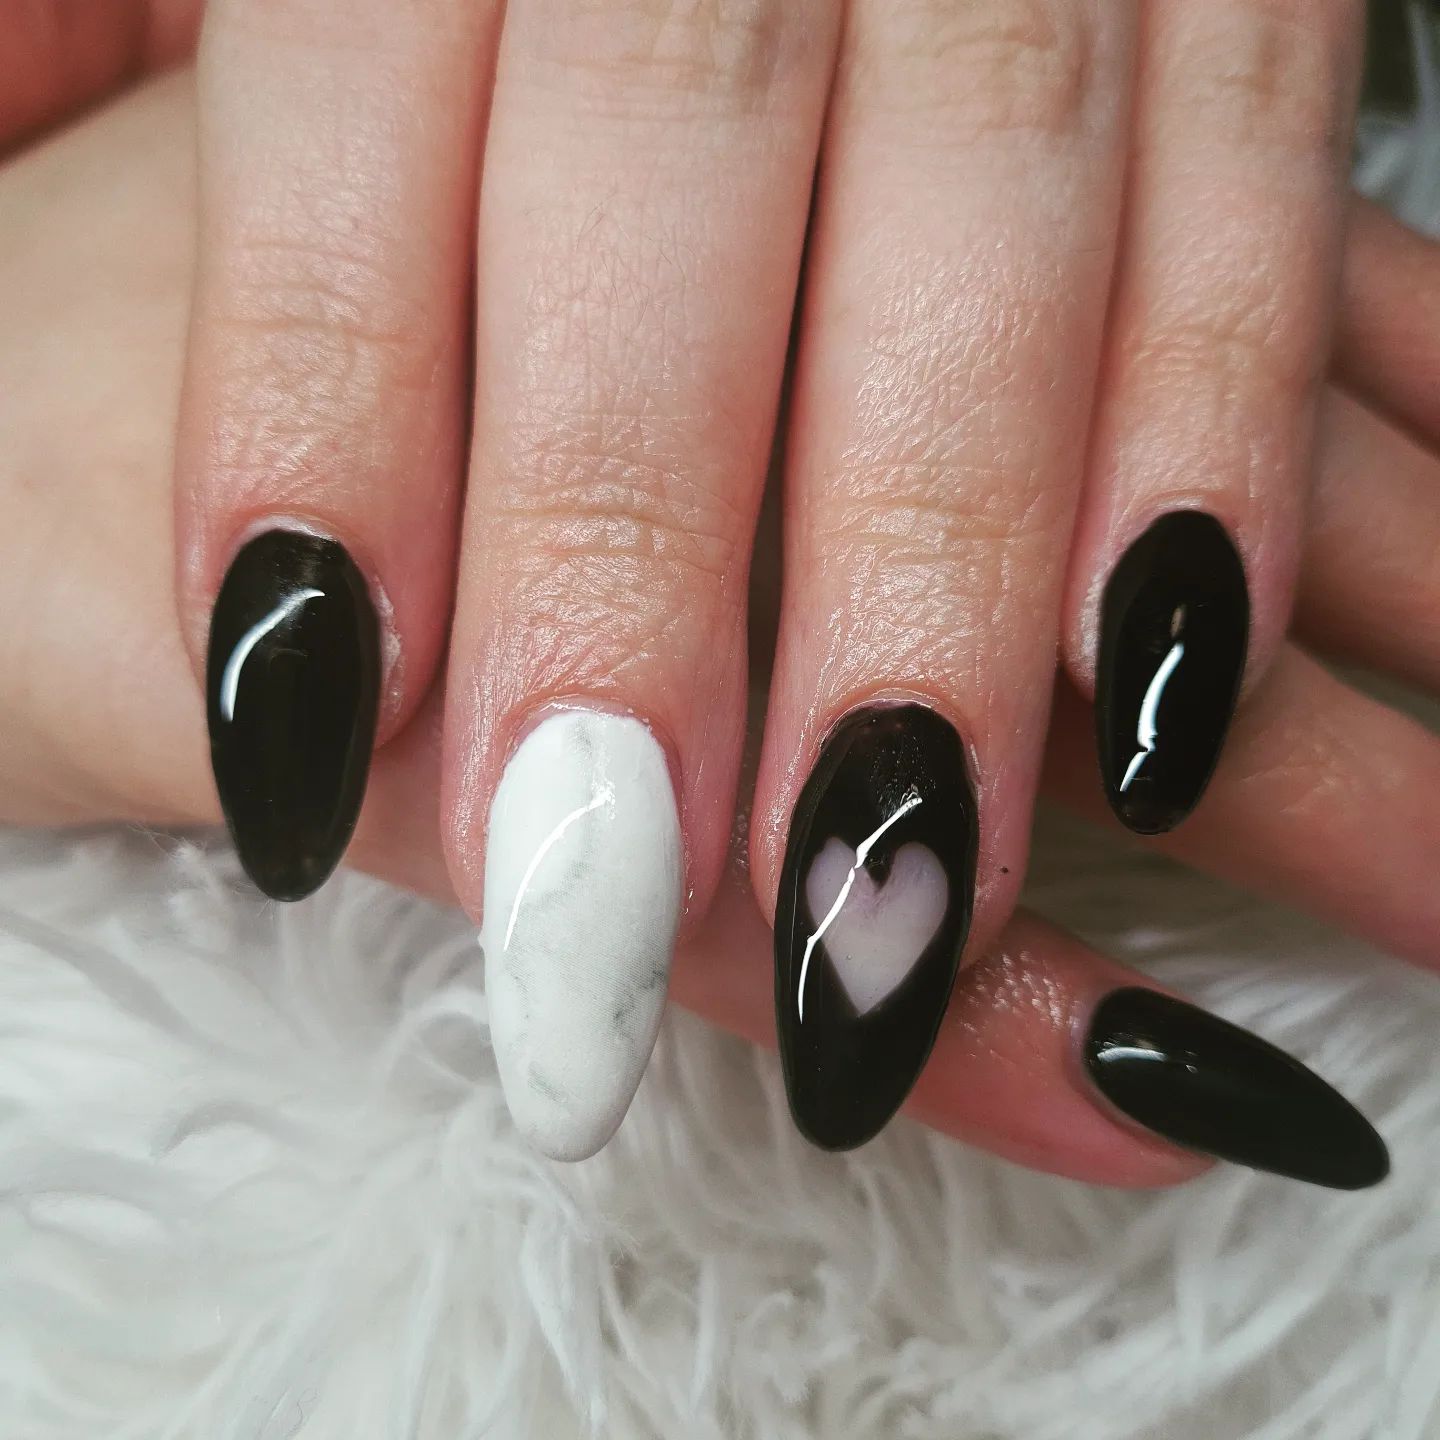 French Manicure with Drag Marble Decoration in Black, White and Silver -  YouTube